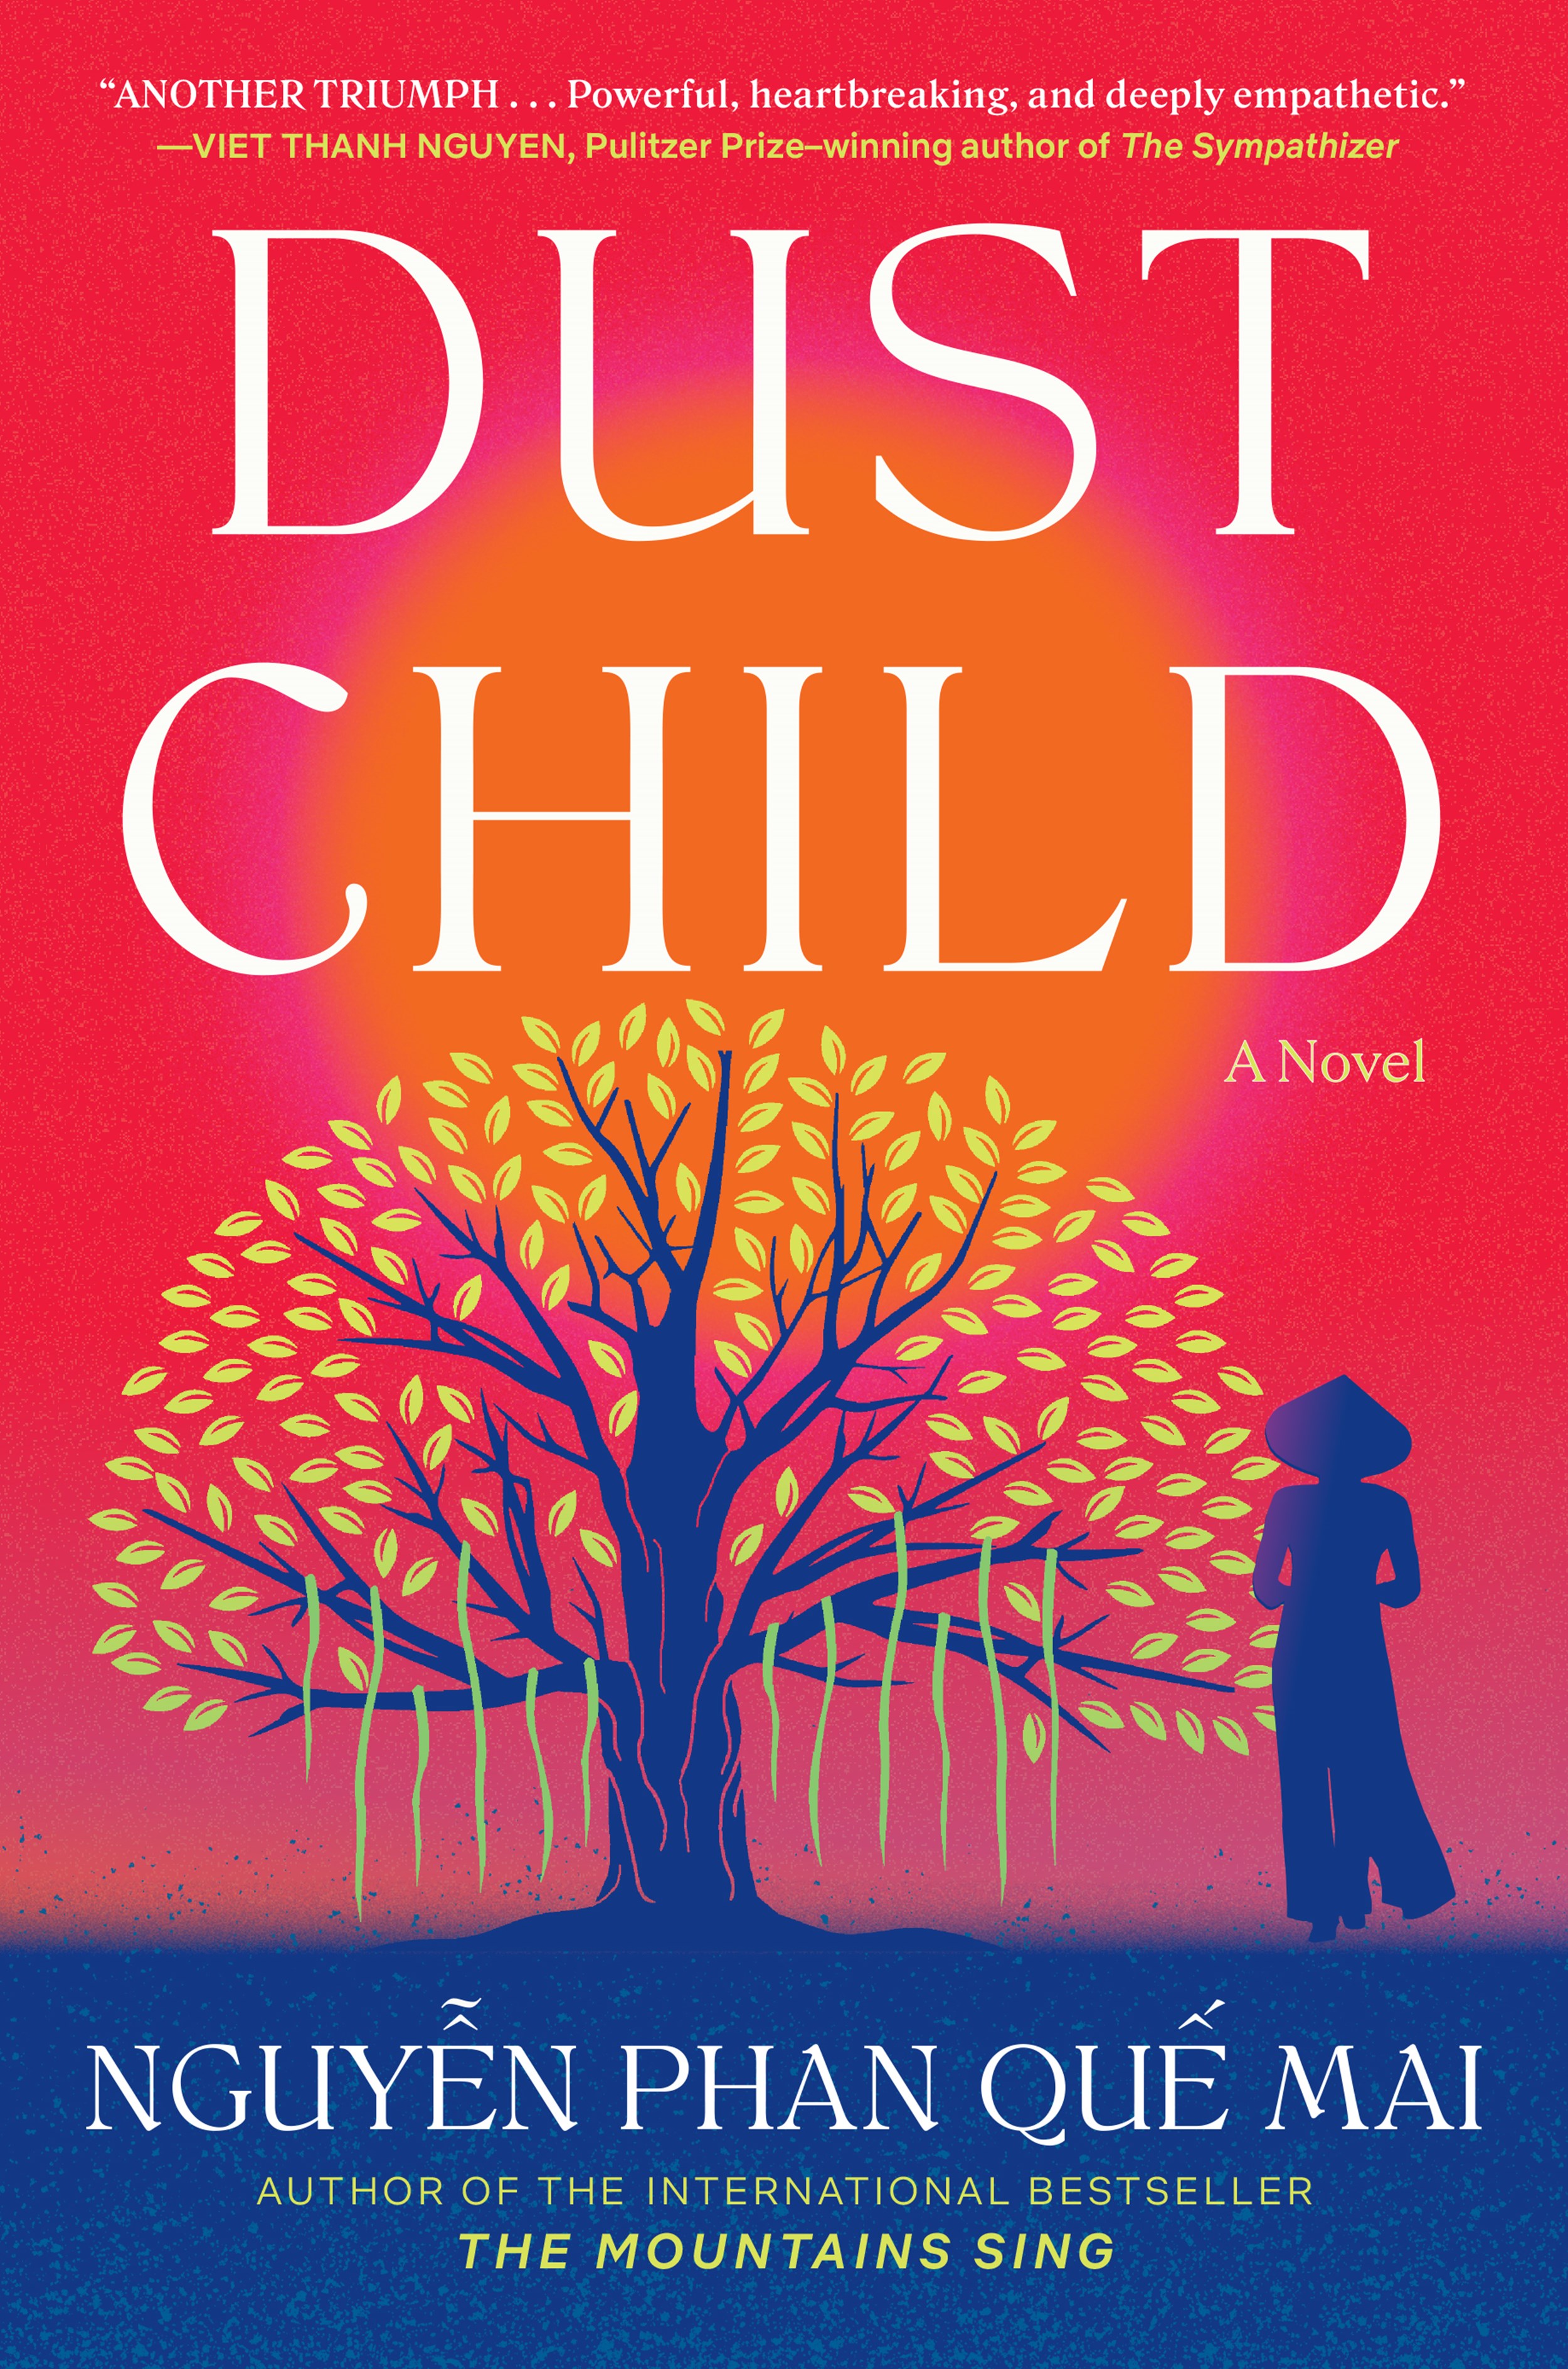 Dust Child book cover.